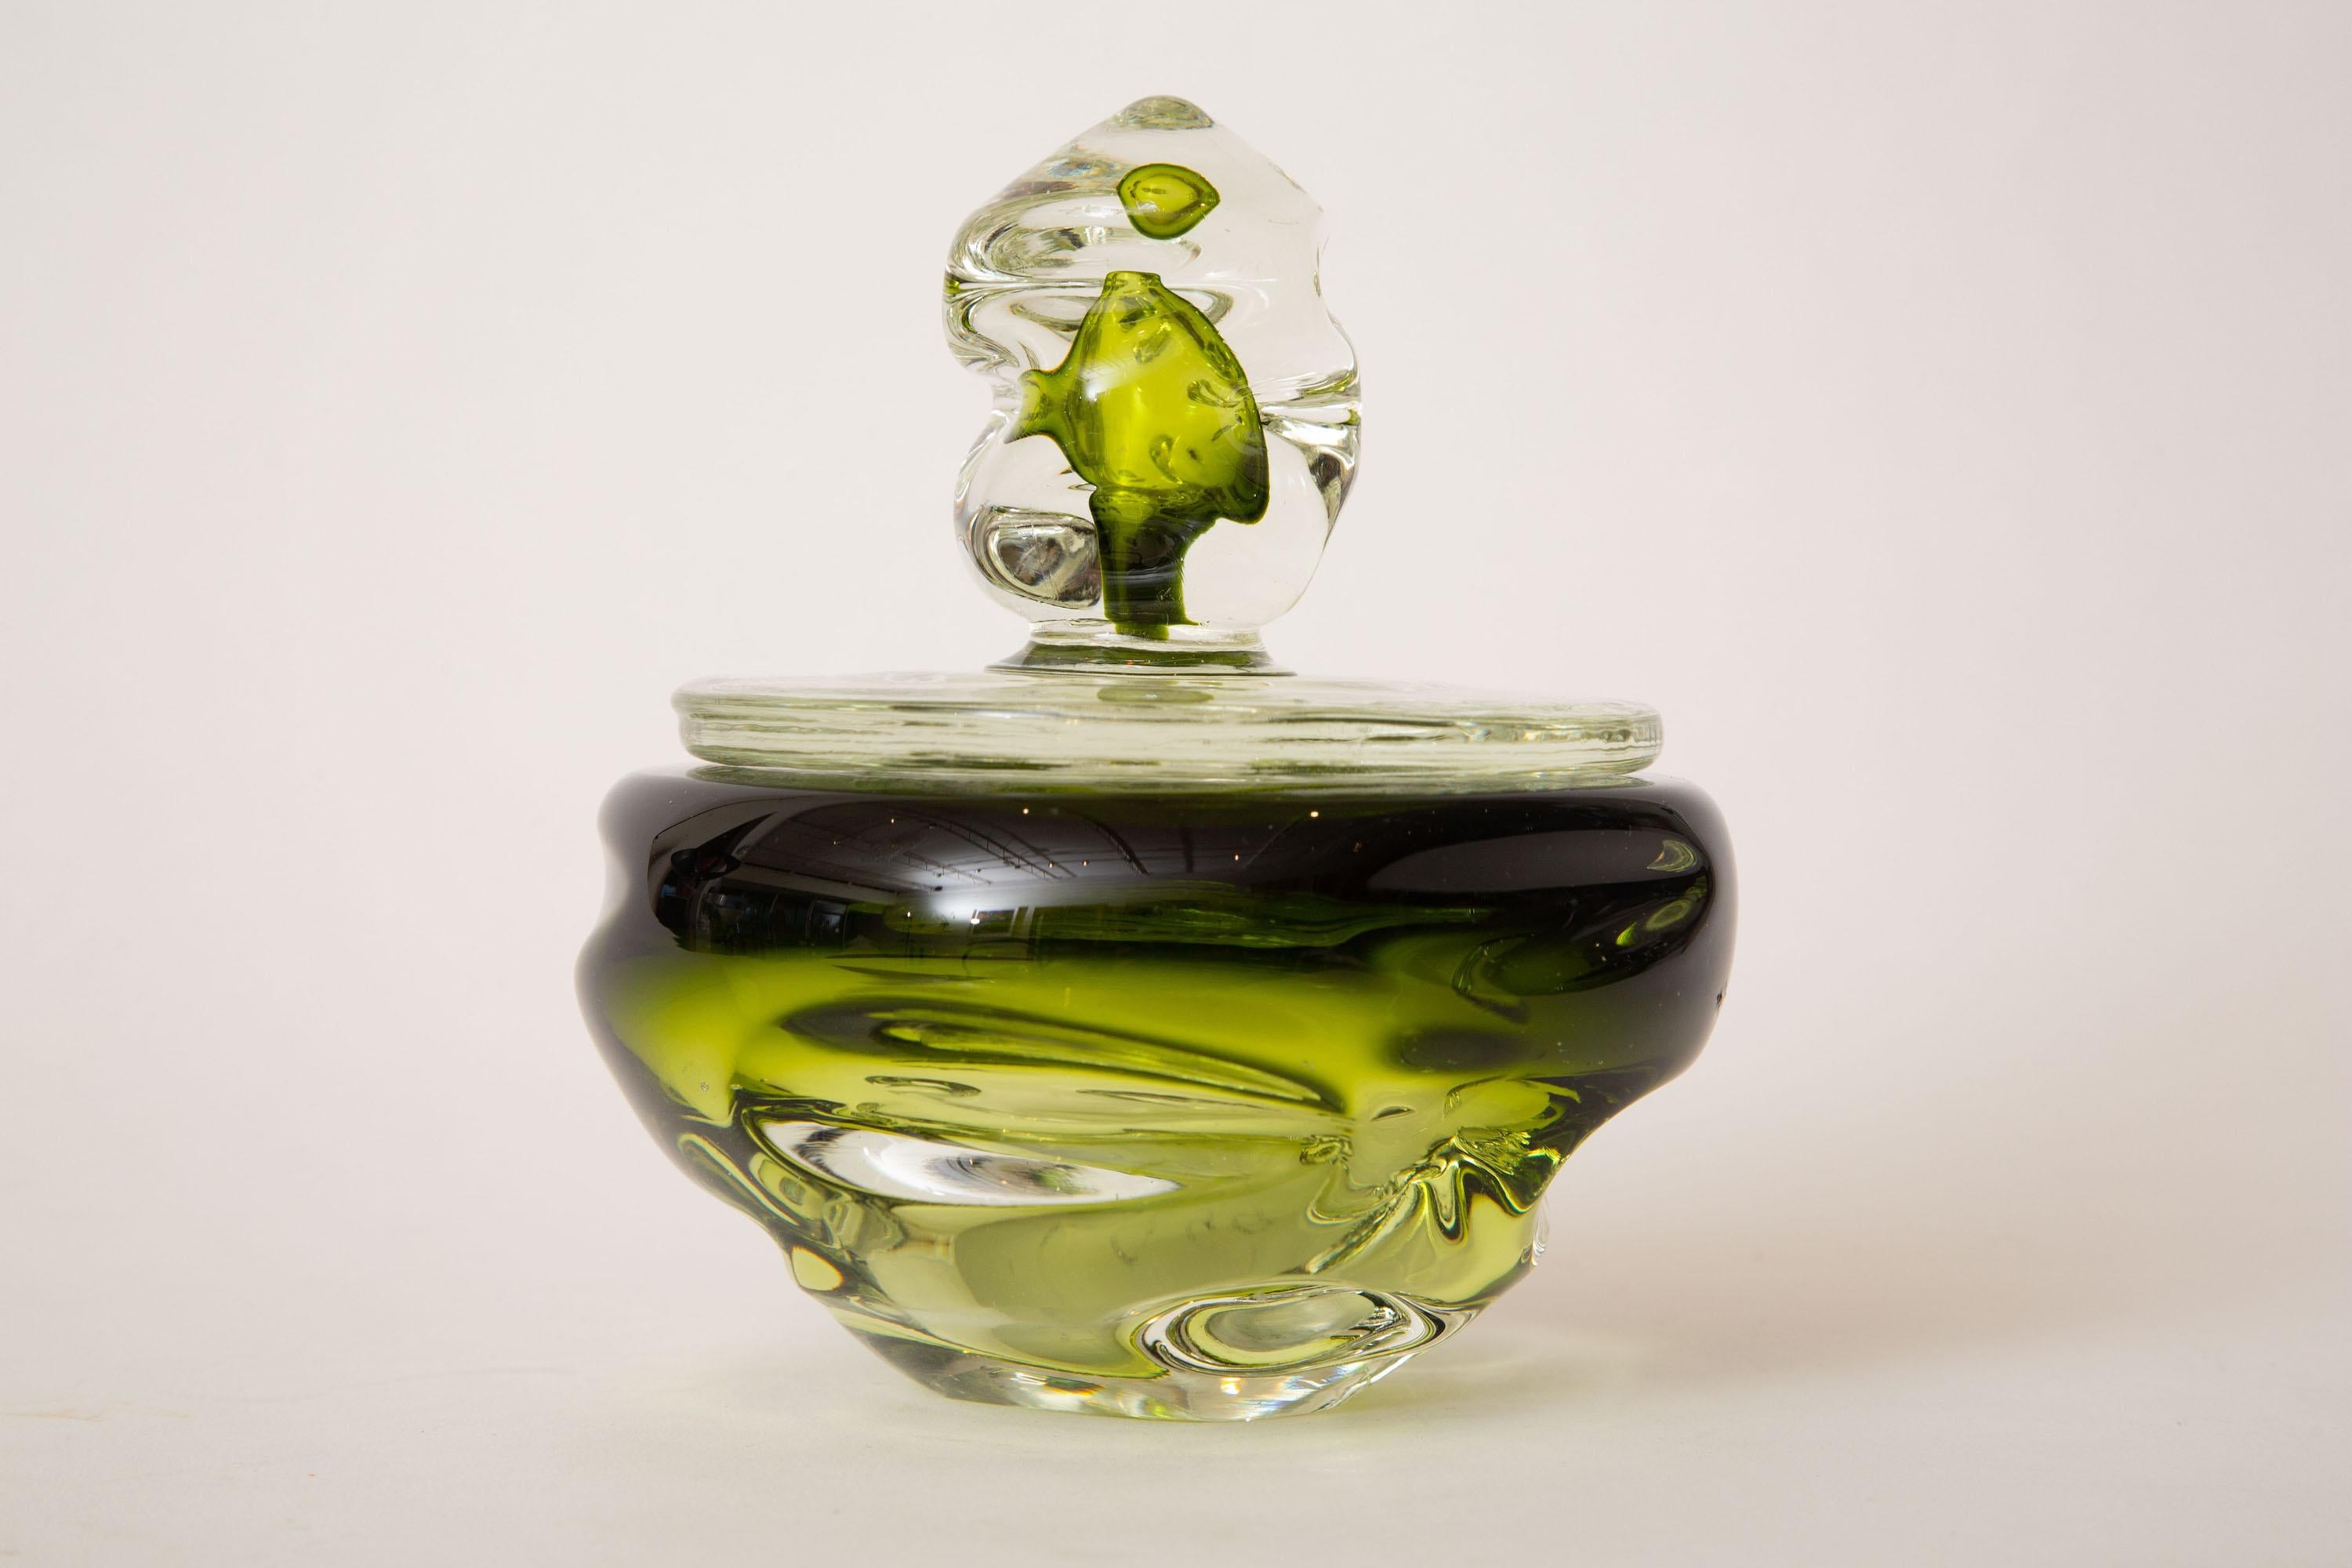 This luscious Italian Murano glass 2 part bowl or box has layerings of sommerso greens against clear. The kelly green, meets army green meets emerald green is beautiful. It has forms of indentations in the glass. This can be used for multiple